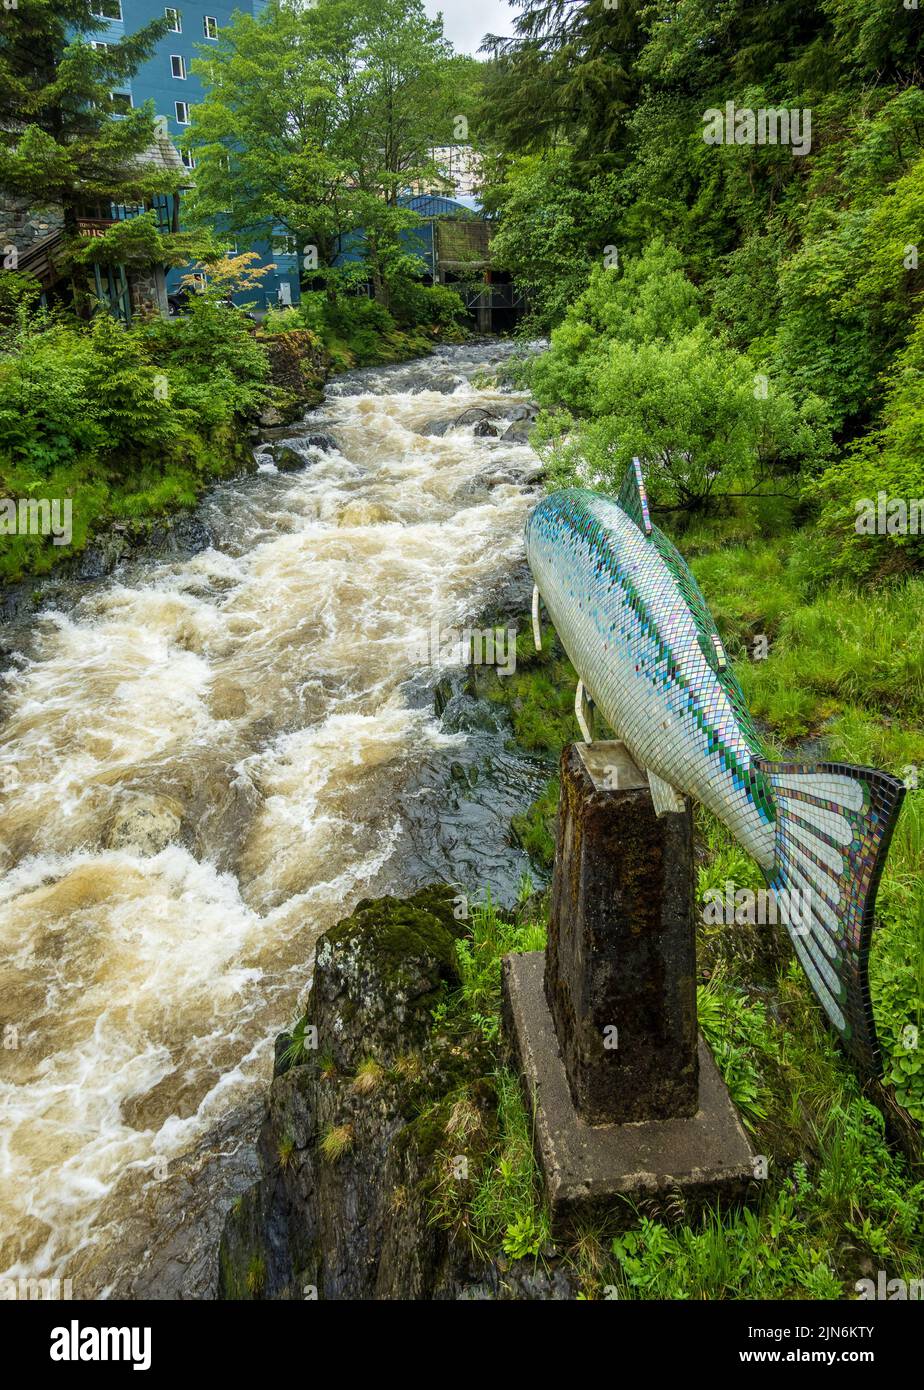 Salmon above the fast running creek in the town of Ketchikan Alaska Stock Photo